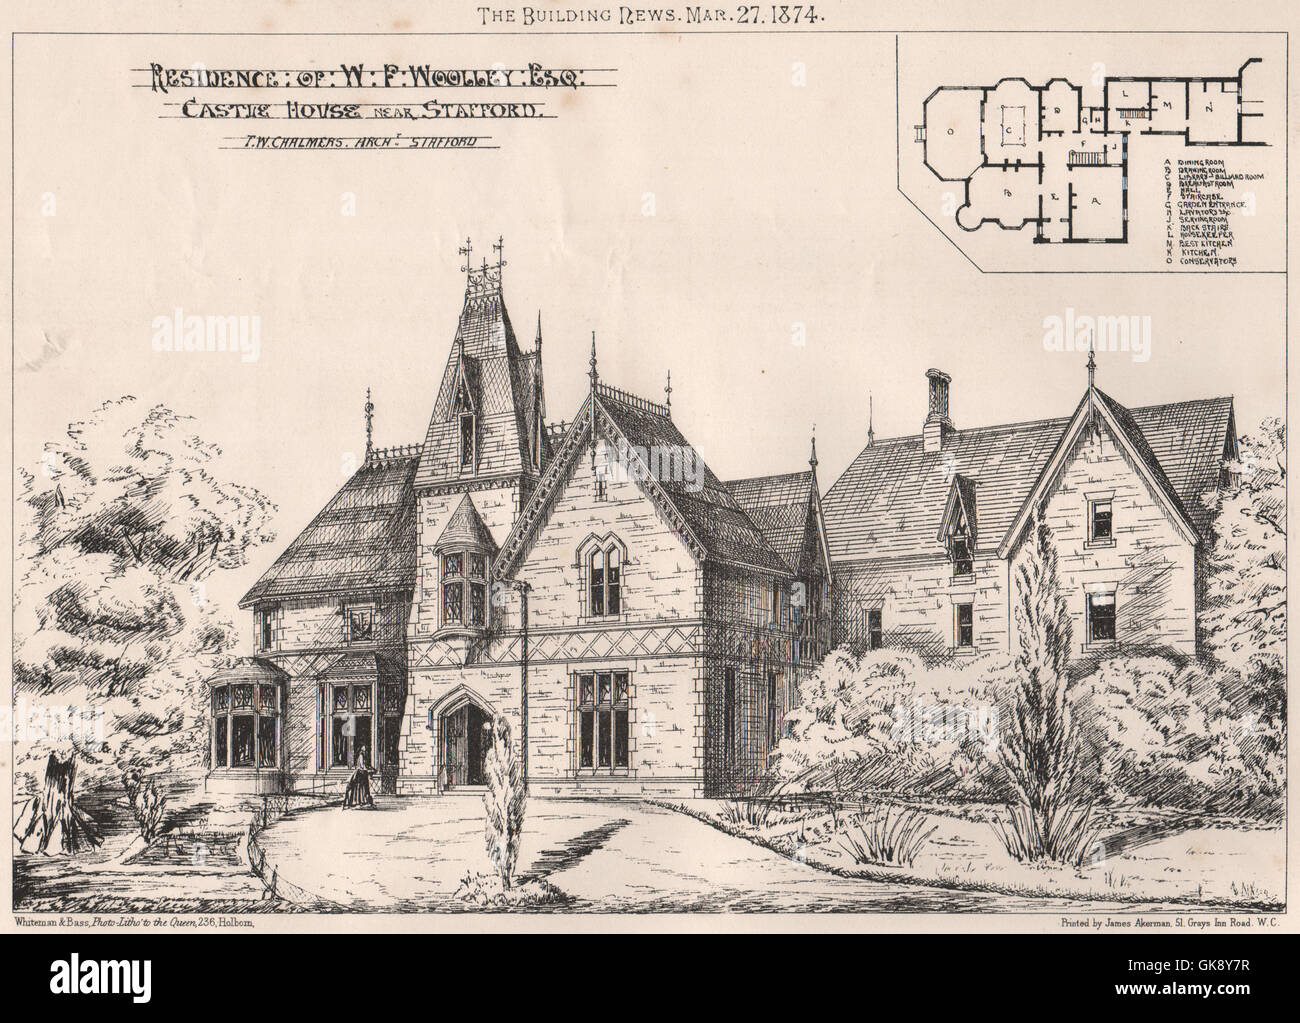 Castle House, nr Stafford, for WF Woolley; T.W. Chalmers Architect, print 1874 Stock Photo